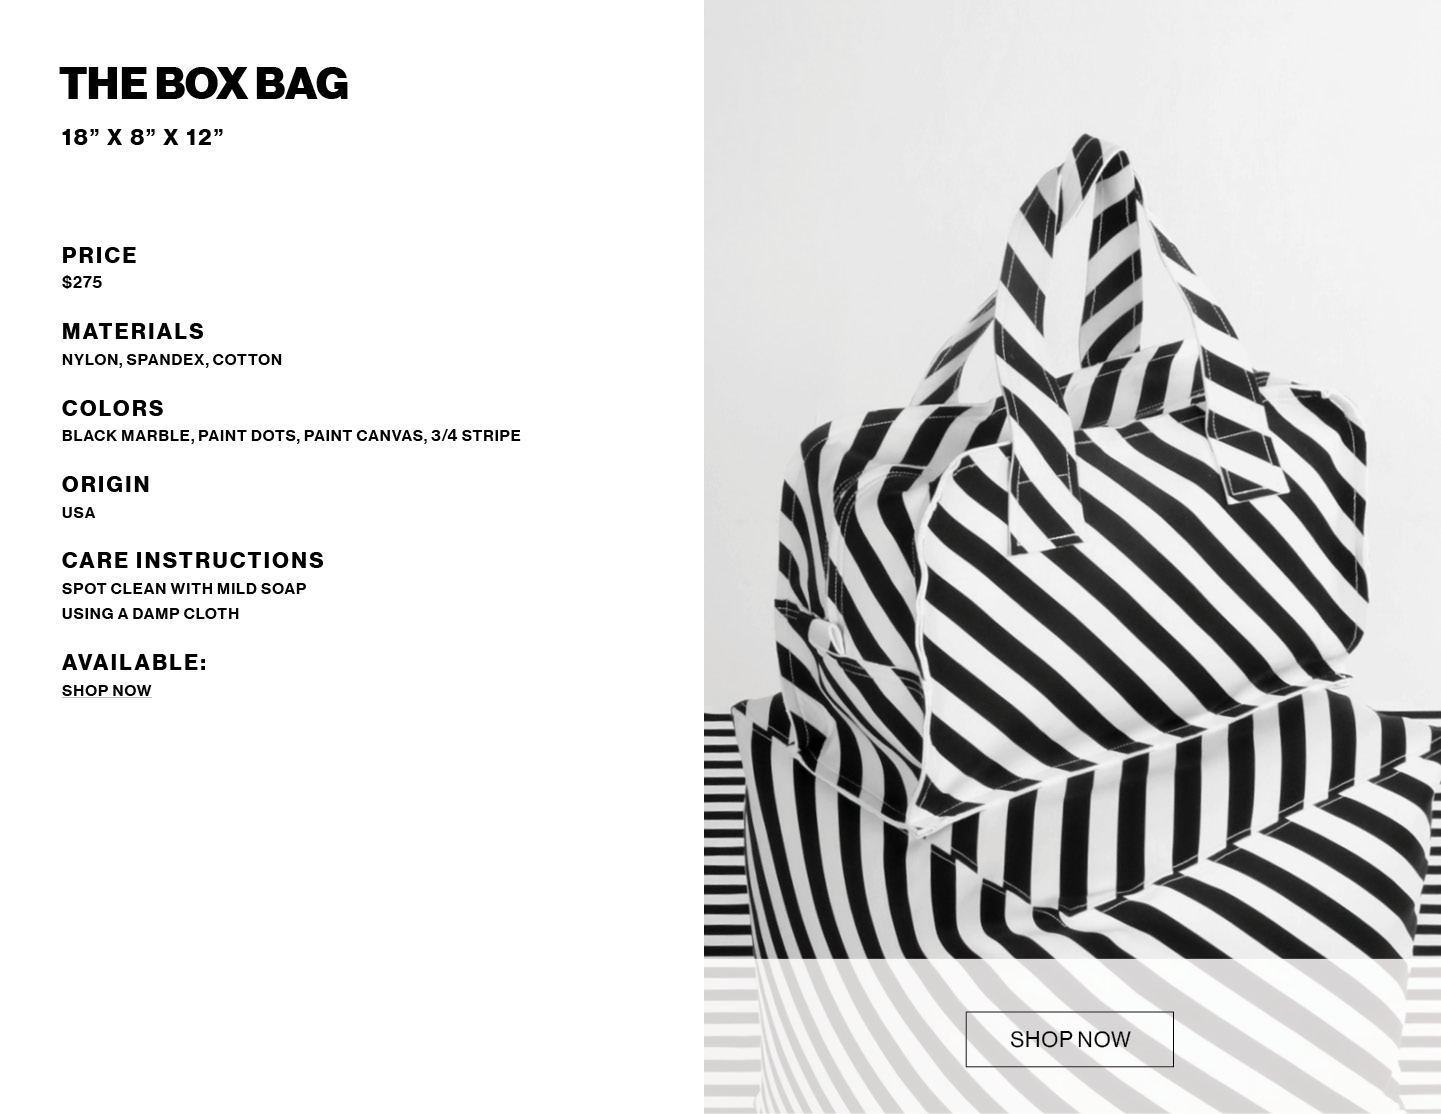 The Box Bag product info